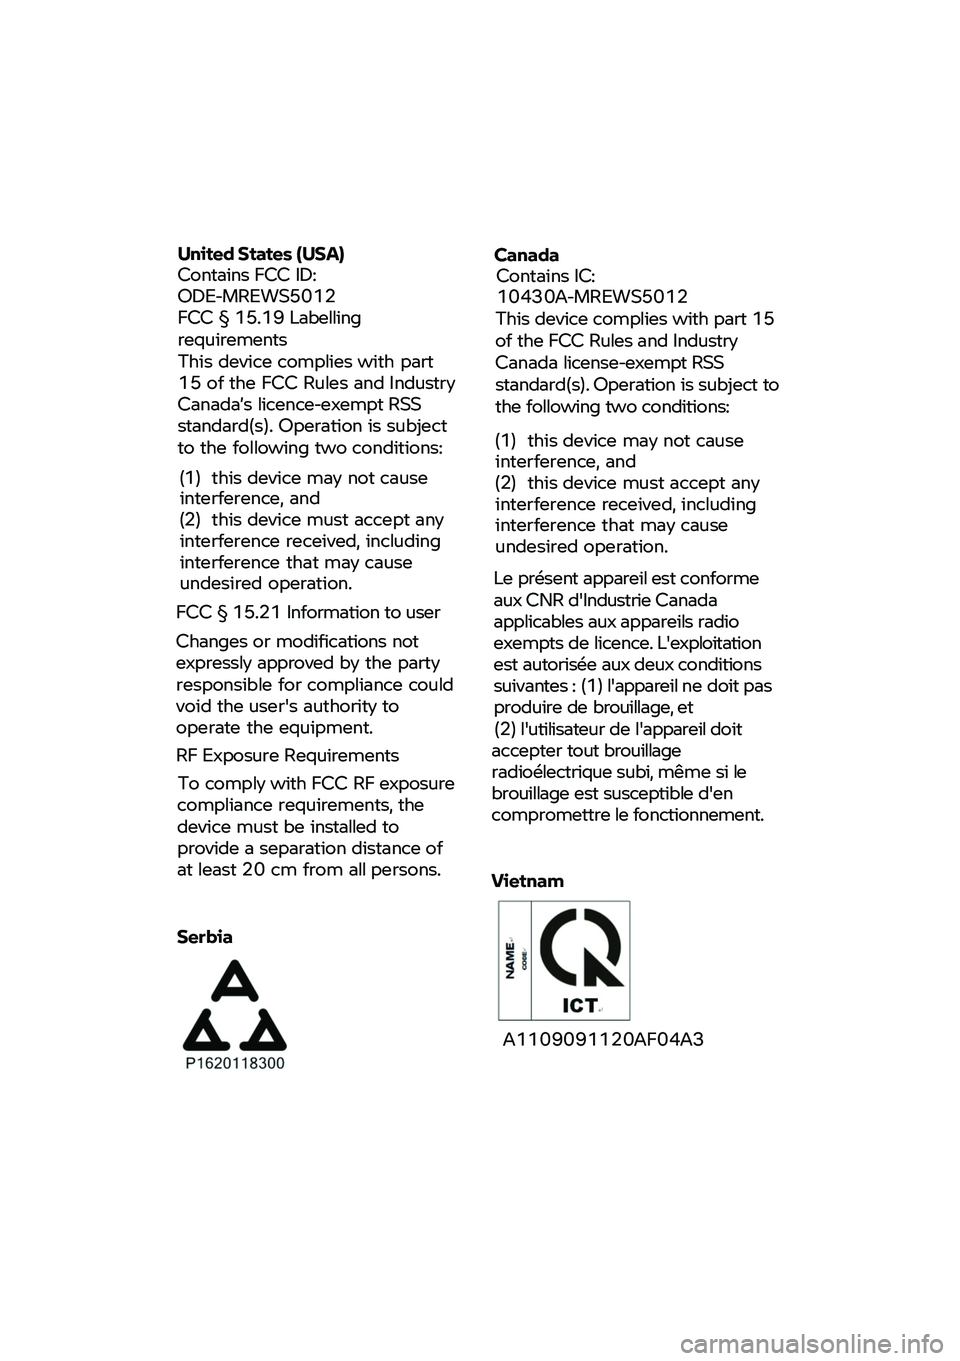 BMW MOTORRAD CE 04 2021  Livret de bord (in French)  
 
 
 
United States (USA) Contains FCC ID: ODE-MREWS5012 FCC § 15.19 Labelling requirements This device complies with part 15 of the FCC Rules and Industry Canada’s licence-exempt RSS standard(s)